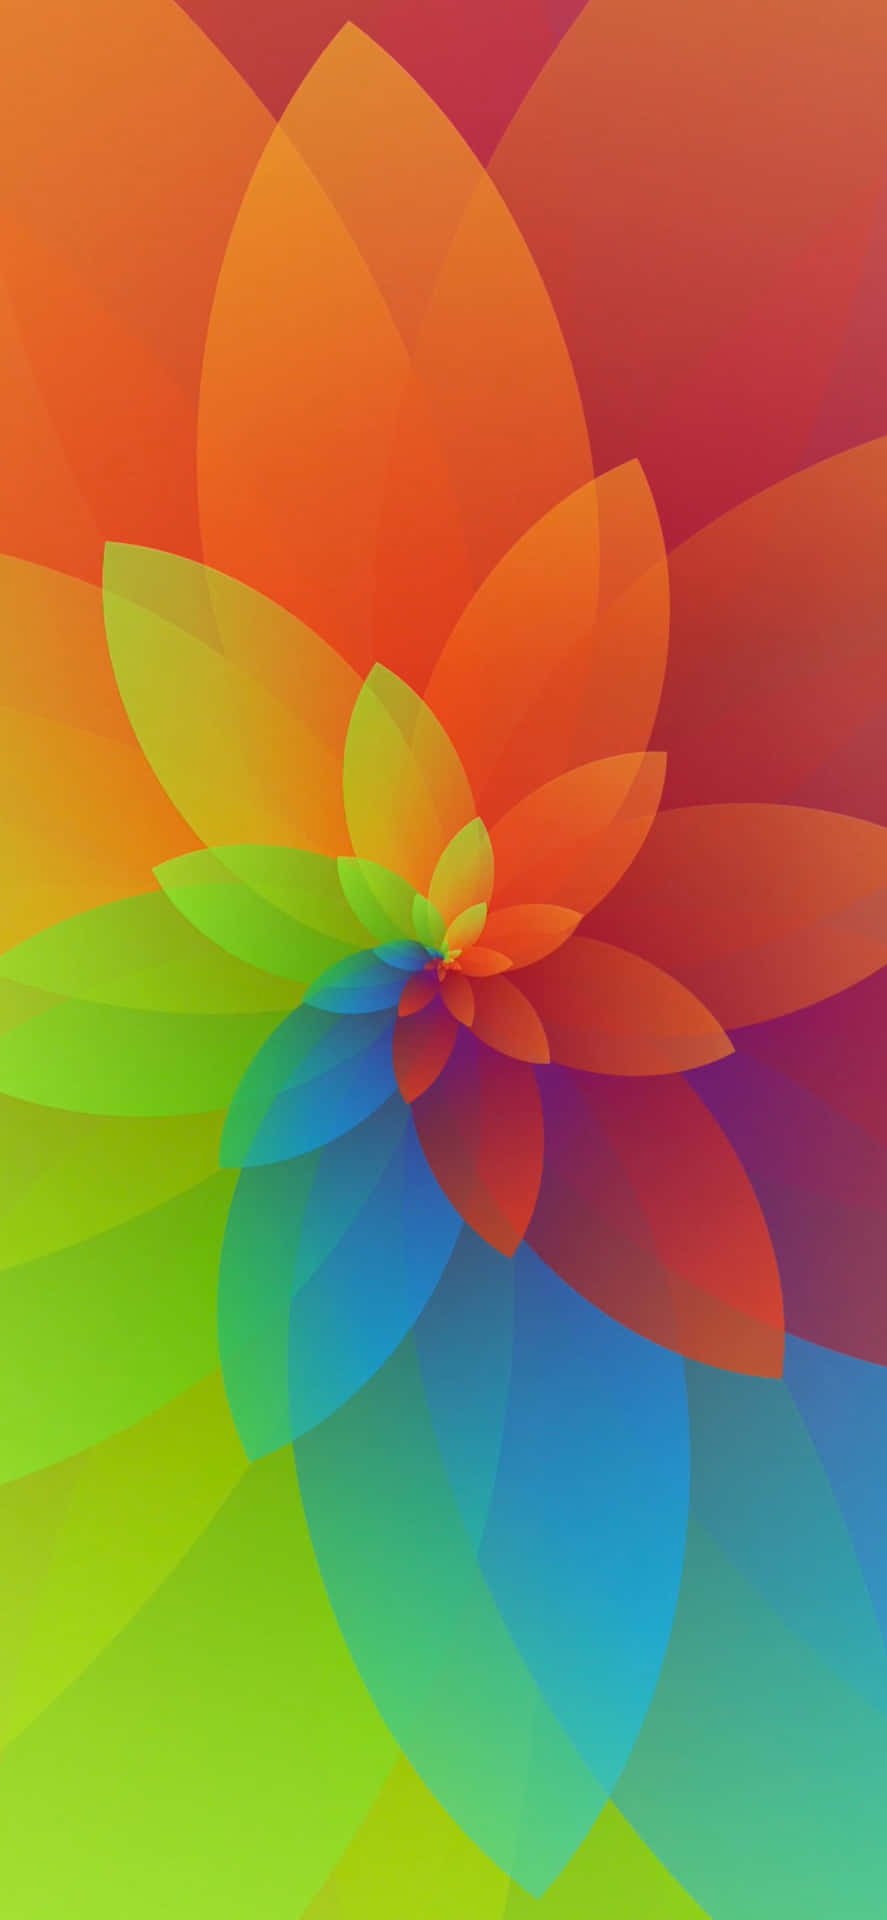 A Colorful Flower With A Rainbow Background Wallpaper